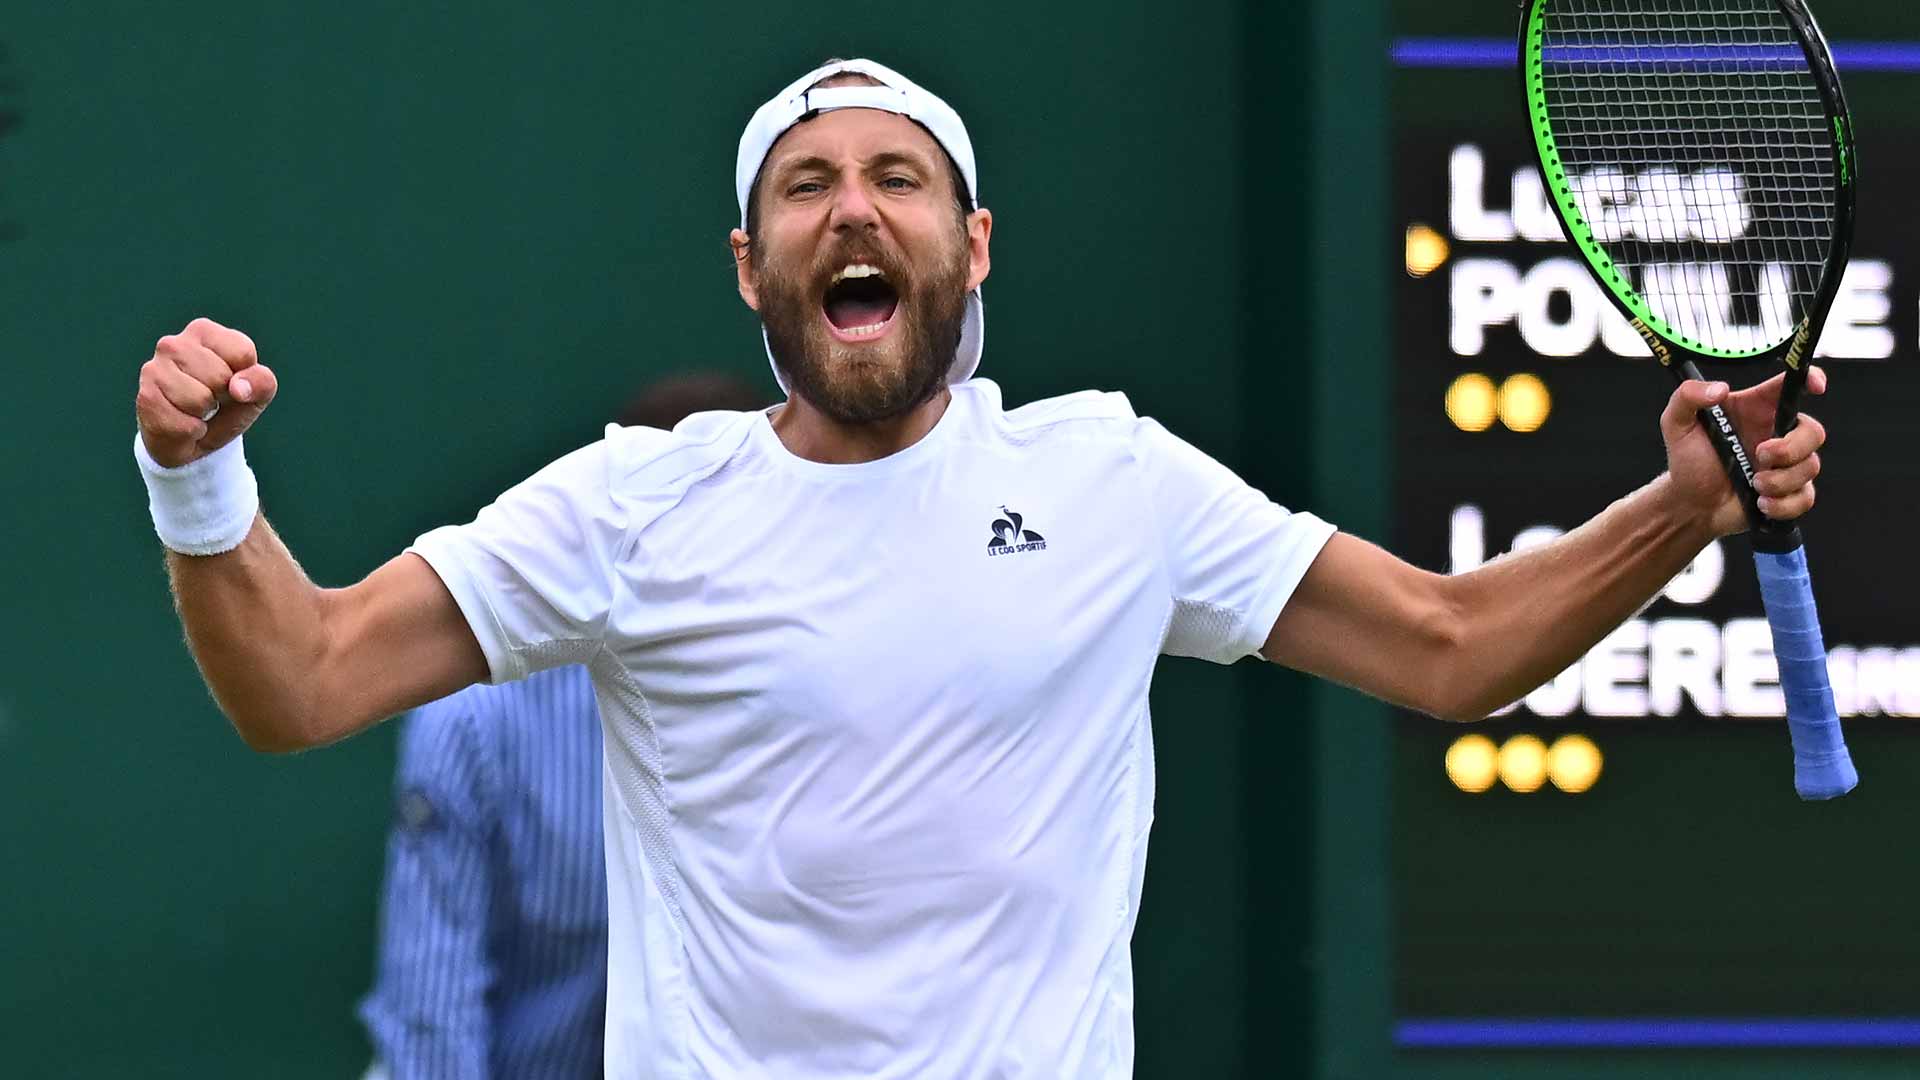 Lucas Pouille is competing in the Wimbledon main draw for the first time since 2021.